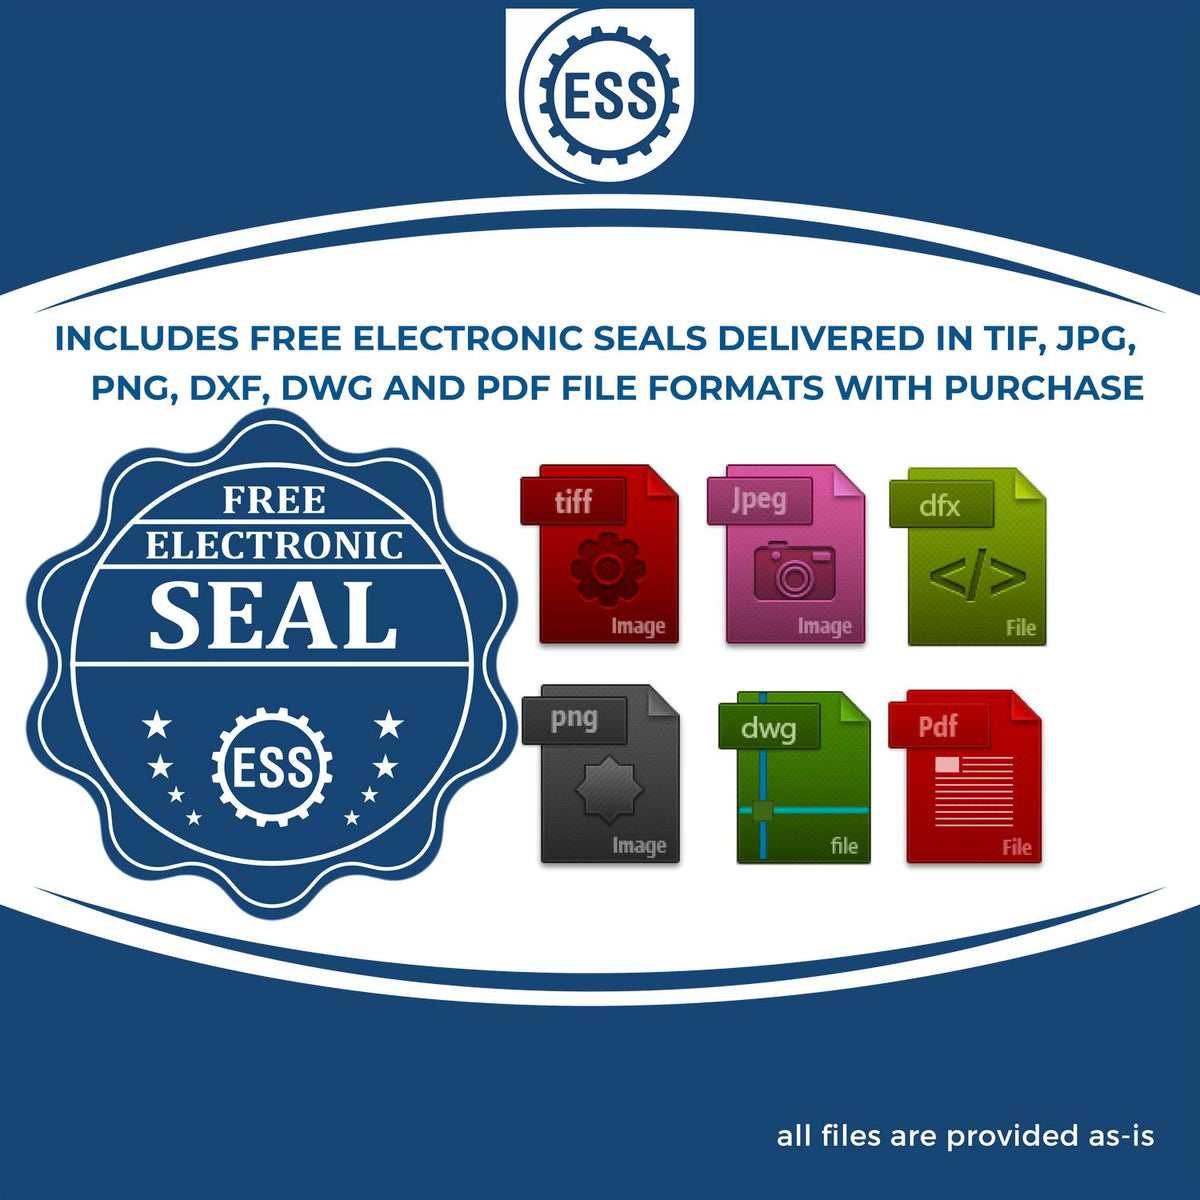 An infographic for the free electronic seal for the Self-Inking Utah PE Stamp illustrating the different file type icons such as DXF, DWG, TIF, JPG and PNG.